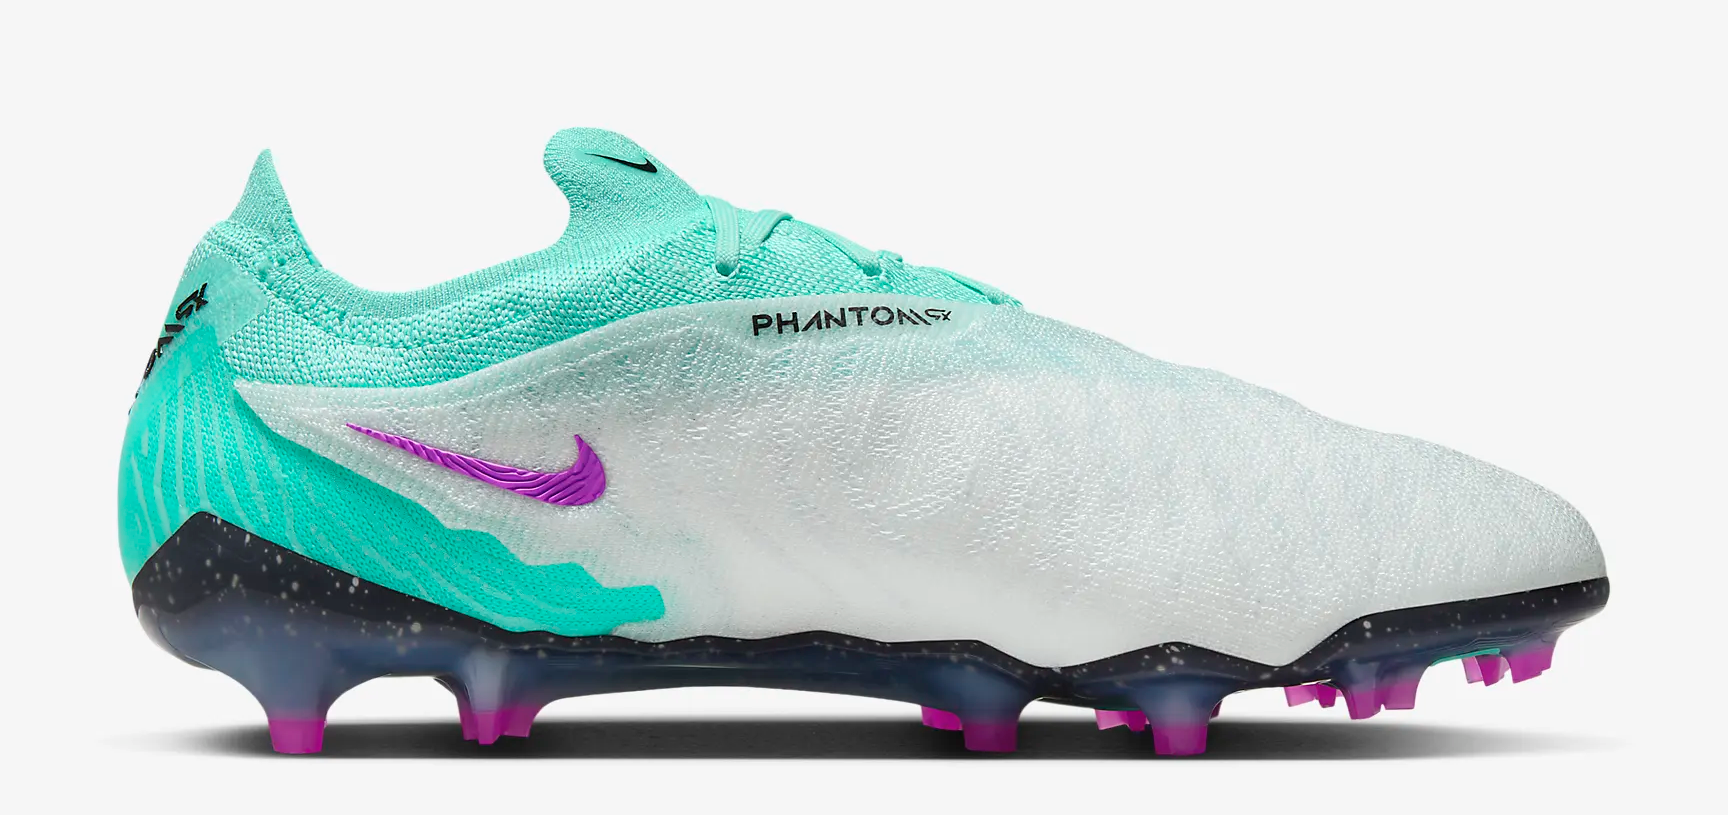 Special Nike Phantom Thunder Boots Collection Revealed - Footy Headlines